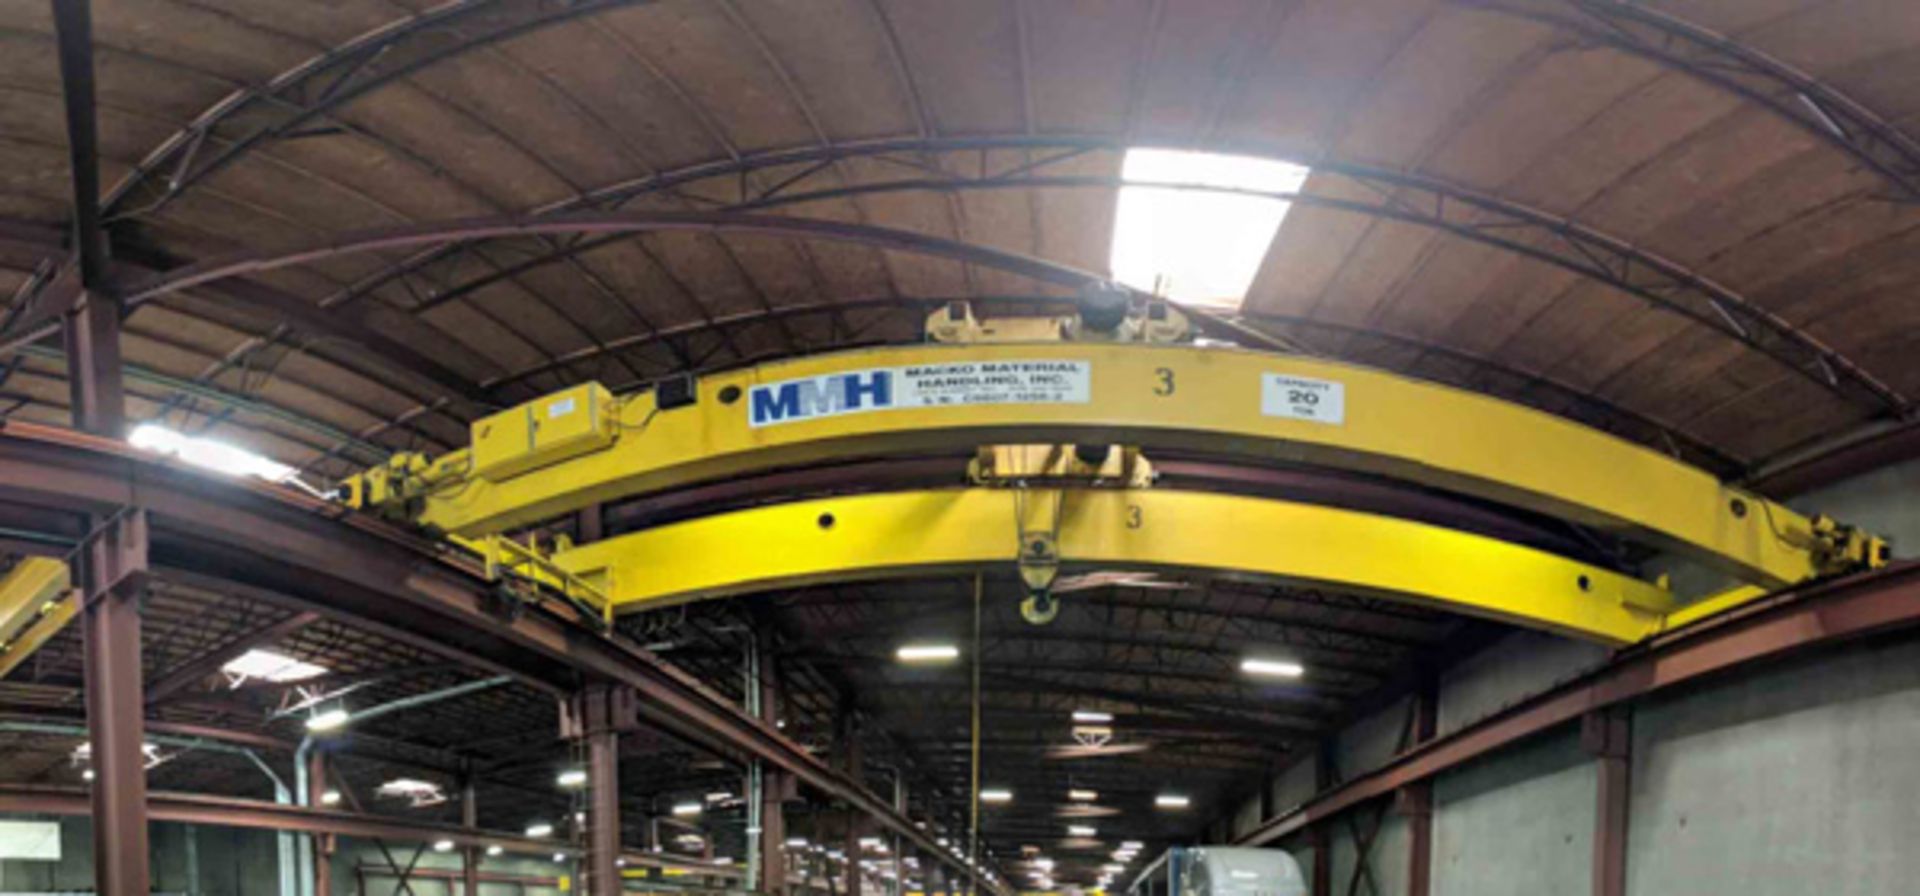 MMH Double Girder Top Running Bridge Crane on ground free loading | 20 Ton x 42', Located In: - Image 16 of 23